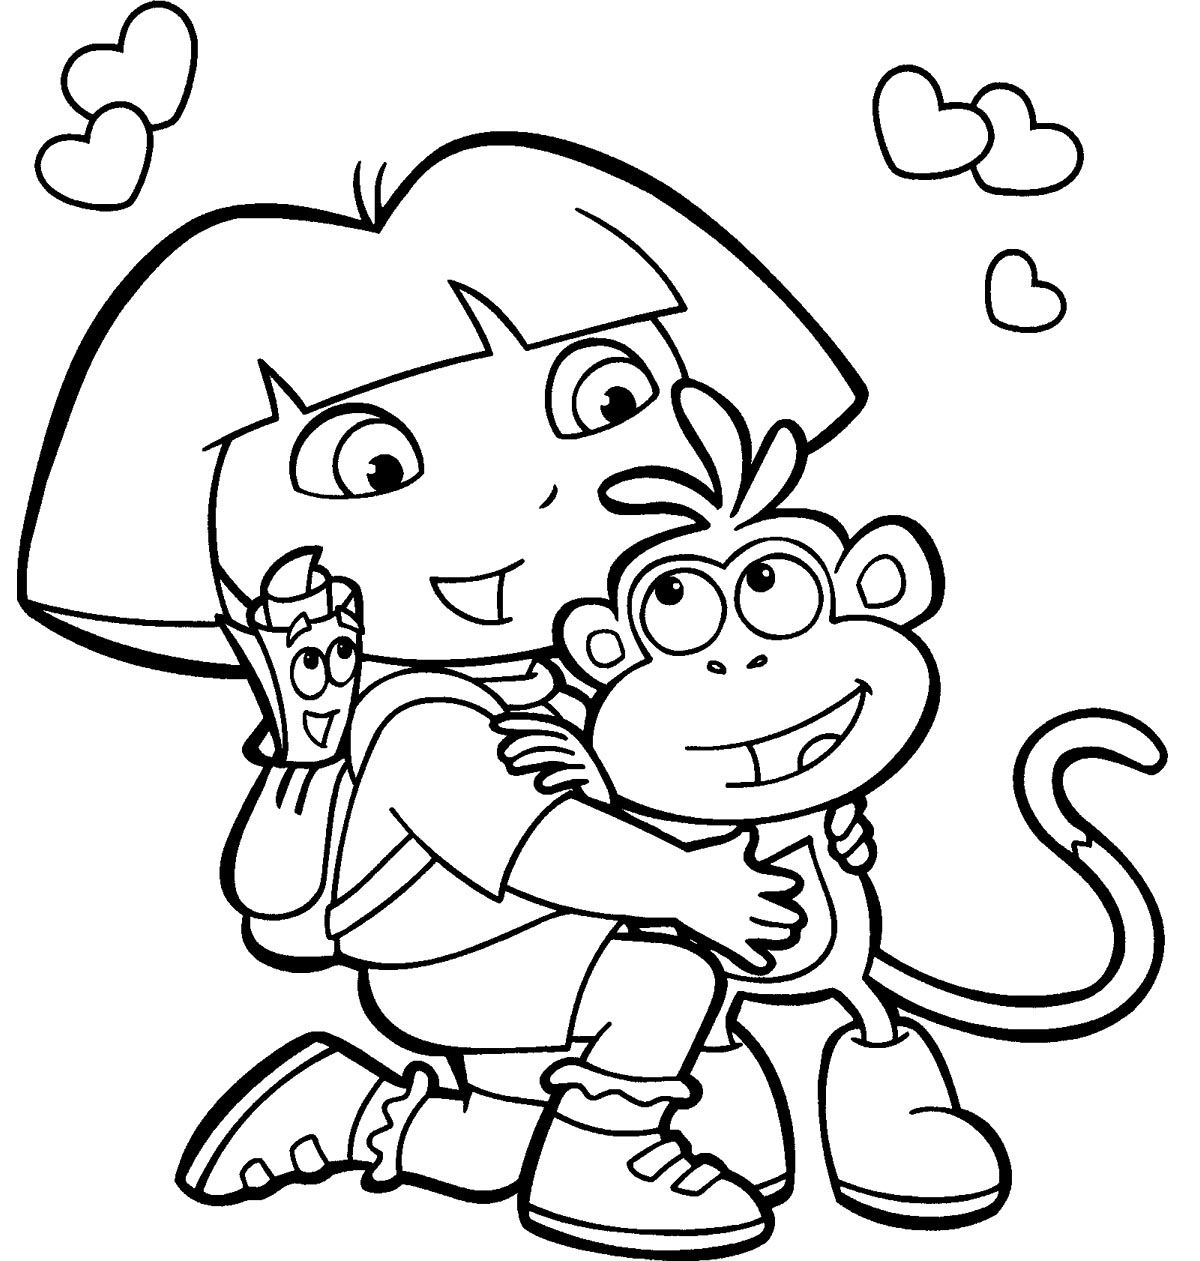 dora to color dora coloring lots of dora coloring pages and printables color to dora 